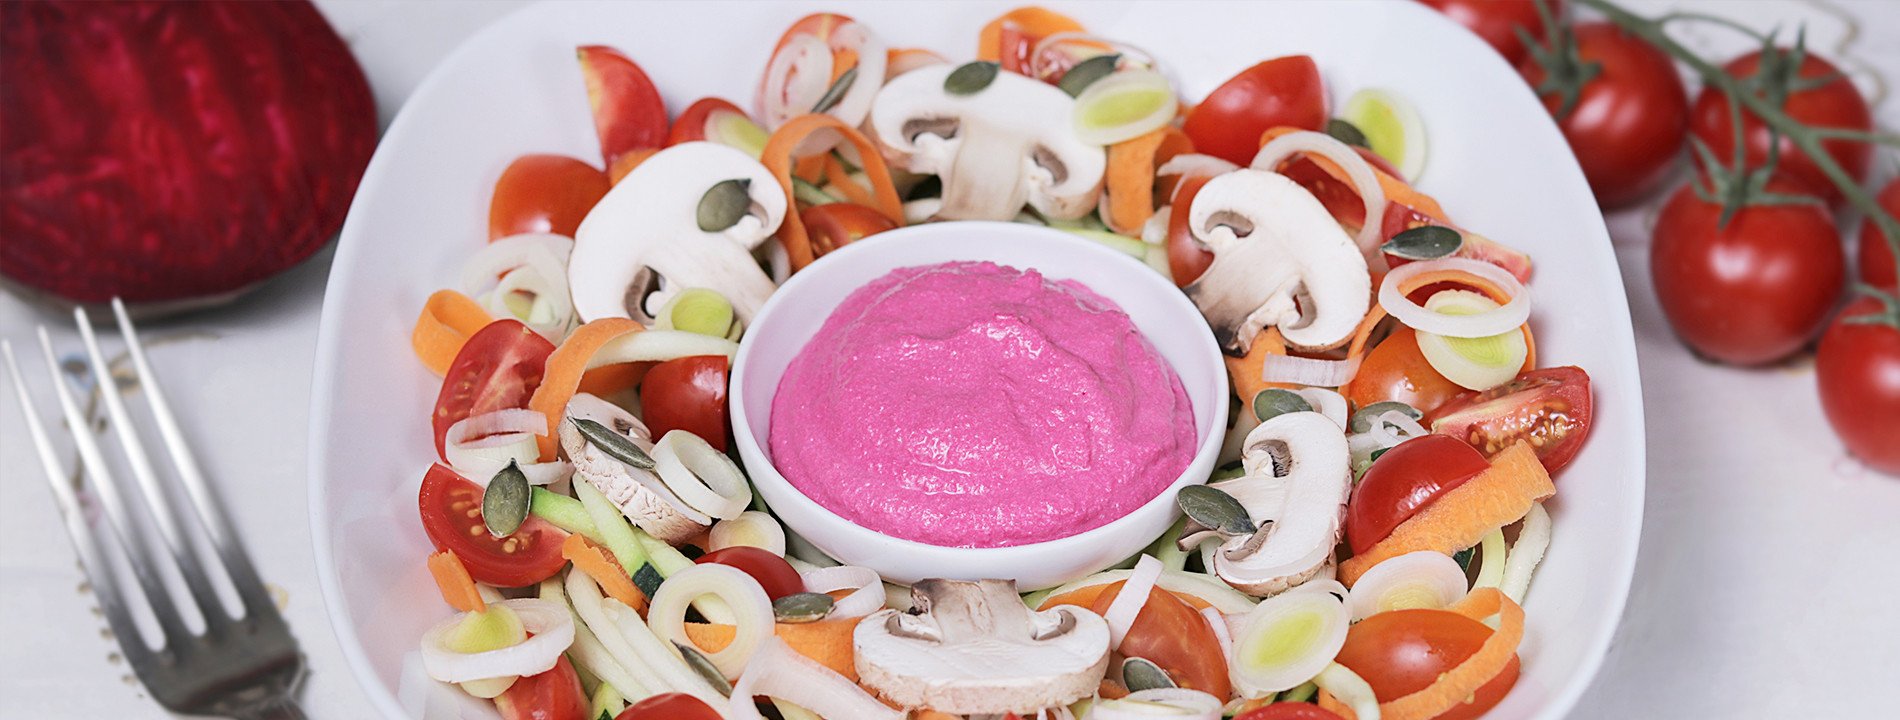 Courgette and Carrot Salad with Beet Hummus